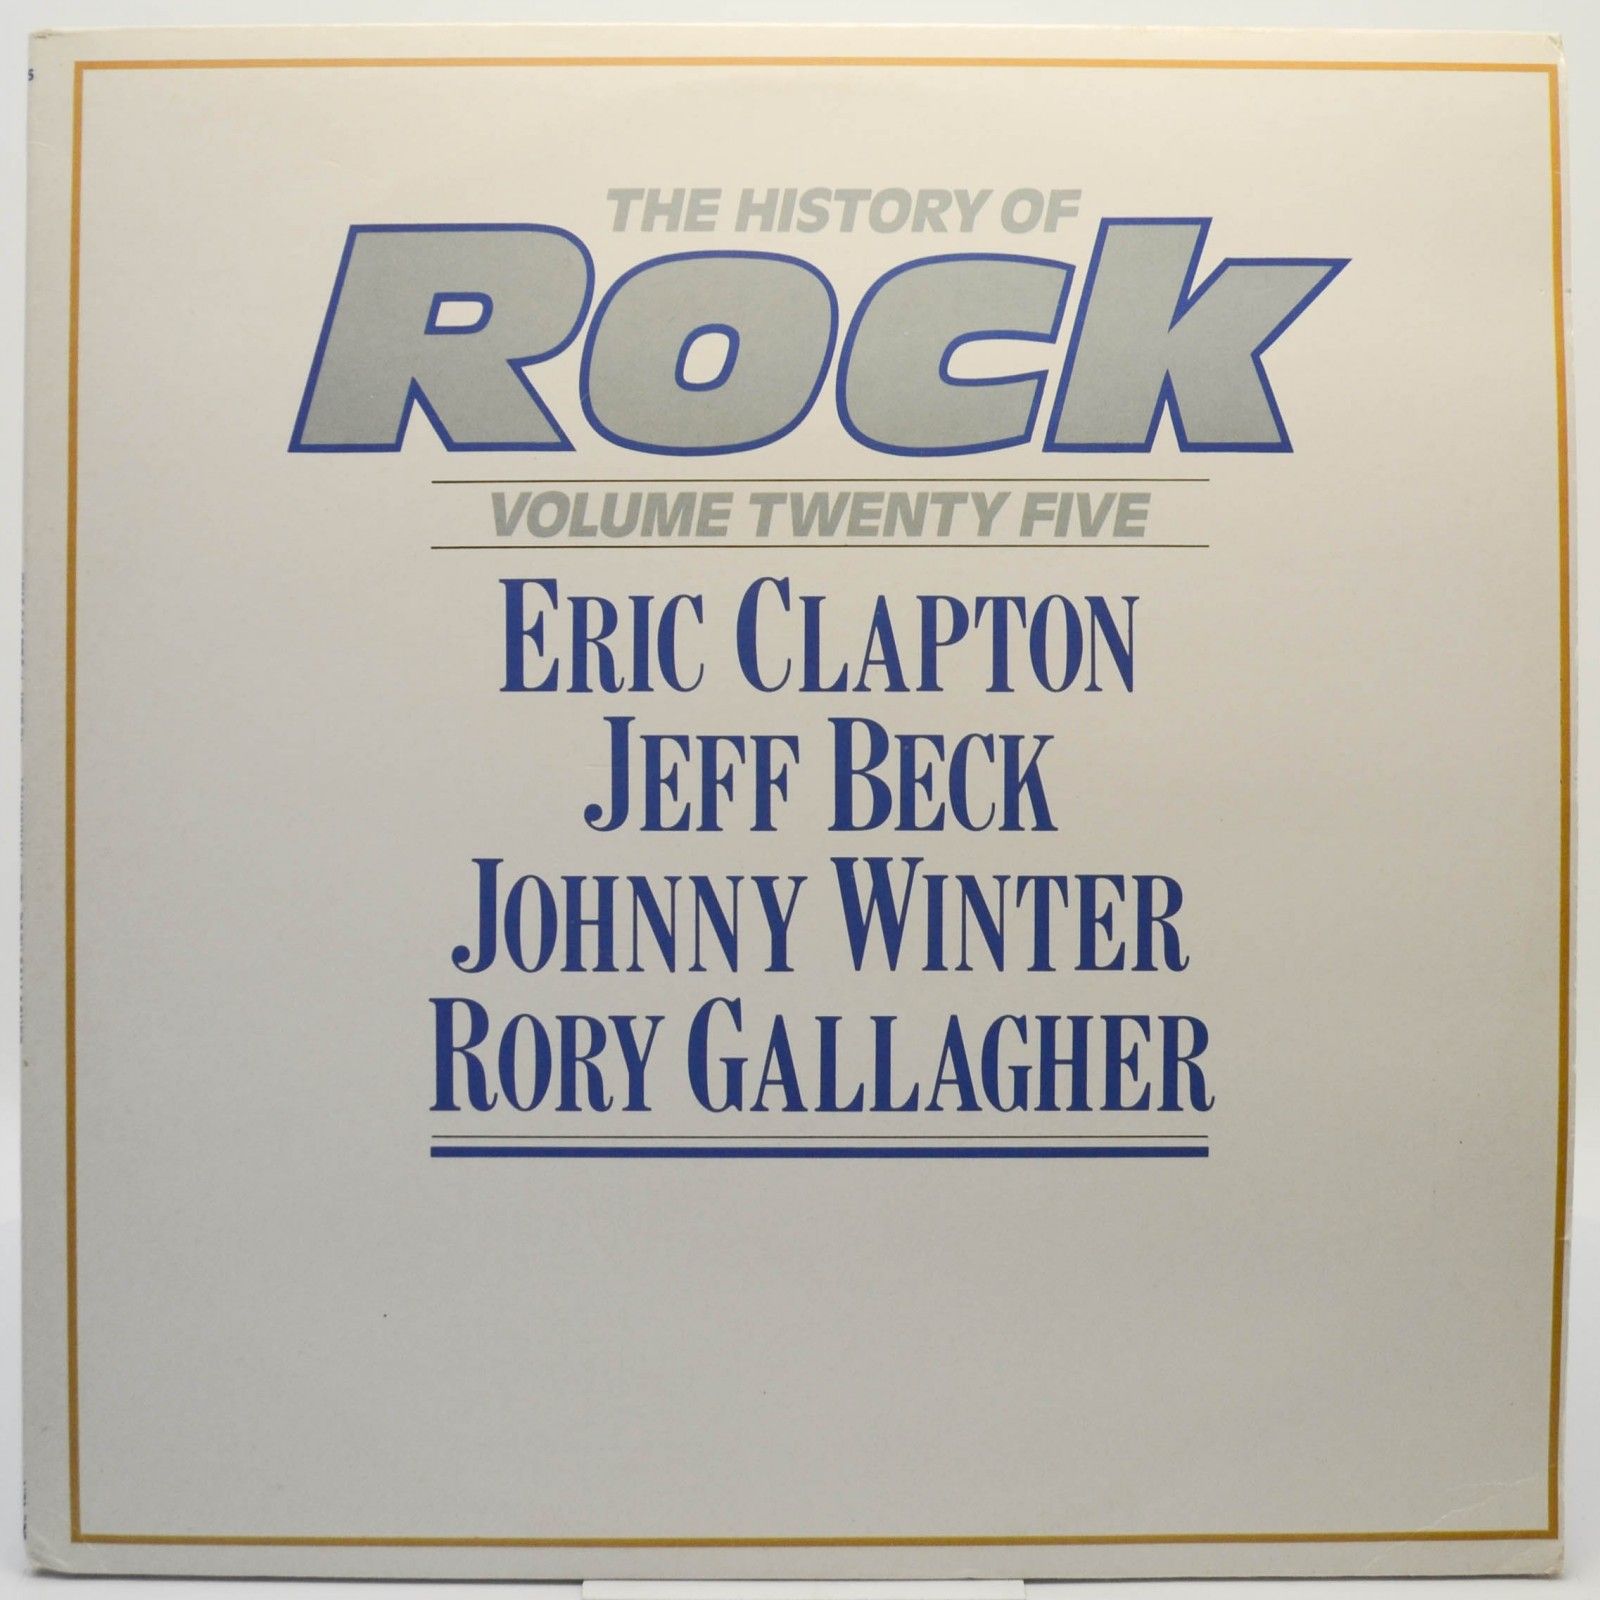 Eric Clapton / Jeff Beck / Johnny Winter / Rory Gallagher — The History Of Rock (Volume Twenty Five) (2LP, UK), 1984